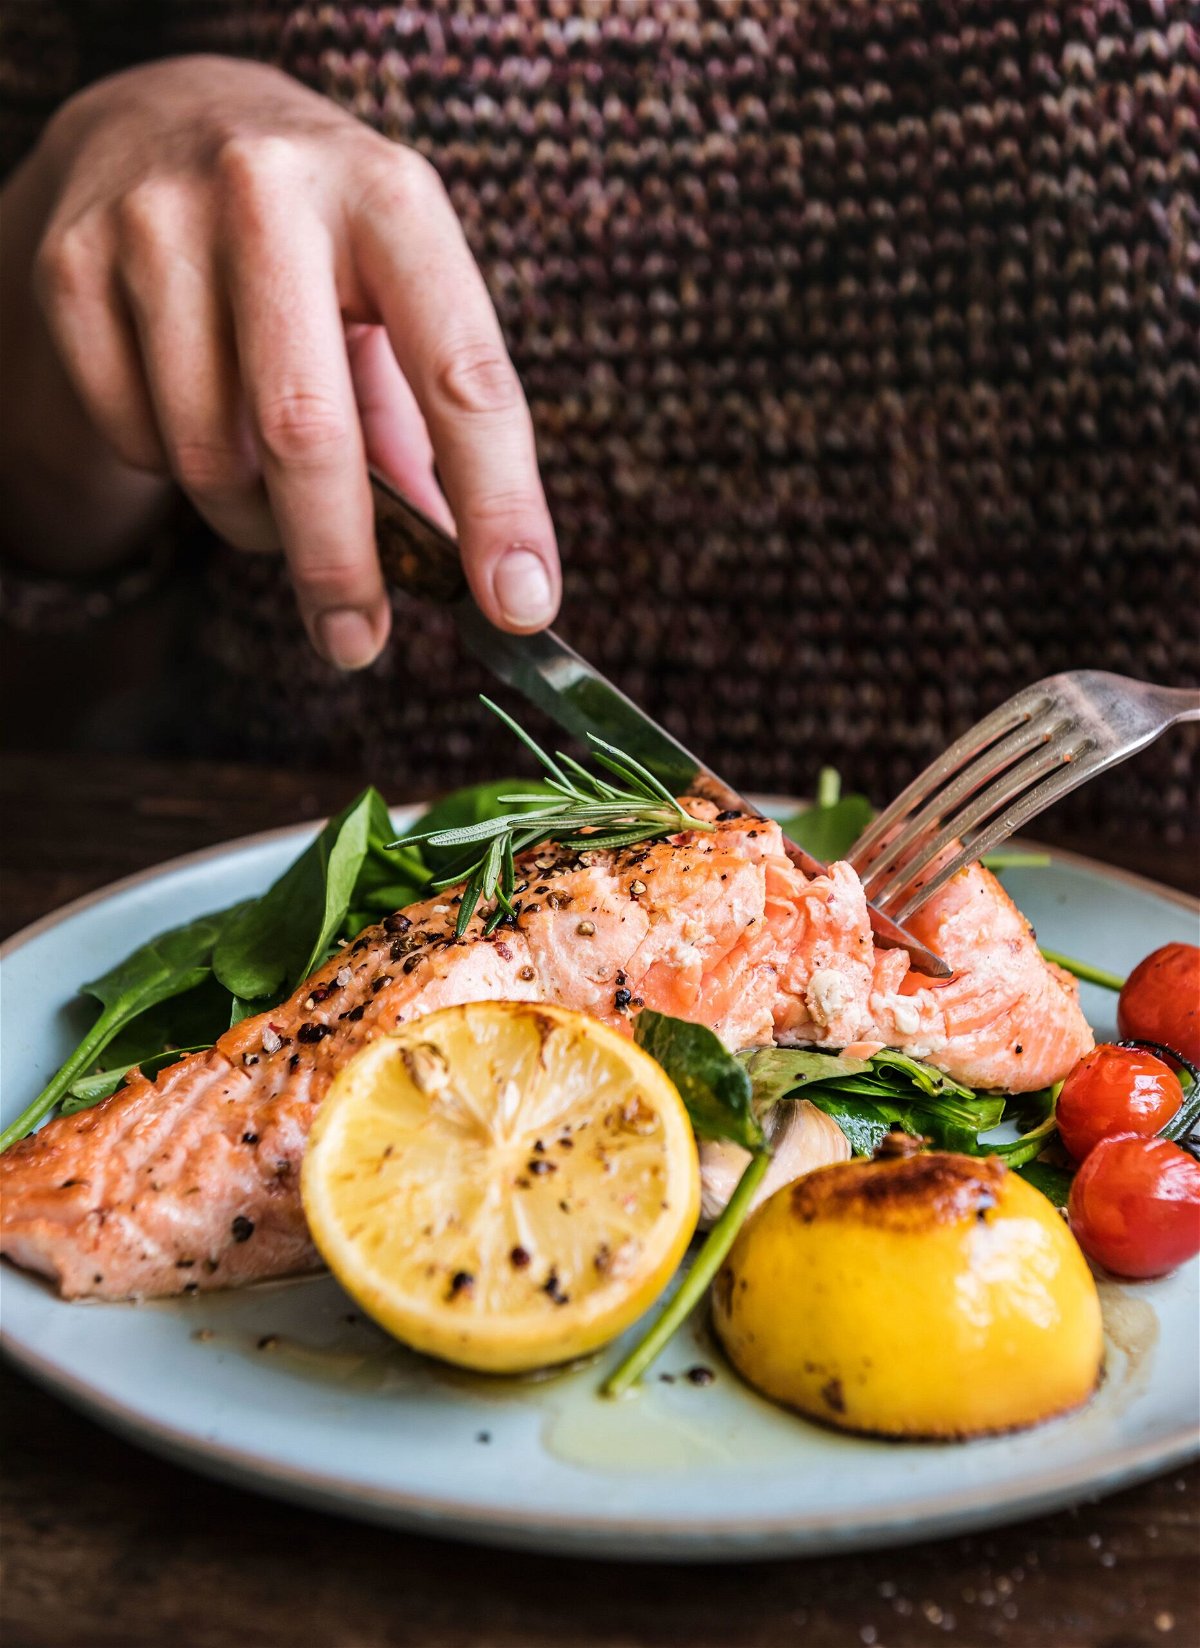 <i>Rawpixel/iStockphoto/Getty Images</i><br/>A serving of fish such as salmon can be key to lowering the risk for heart disease due to its high content of healthy omega-3 fatty acids.